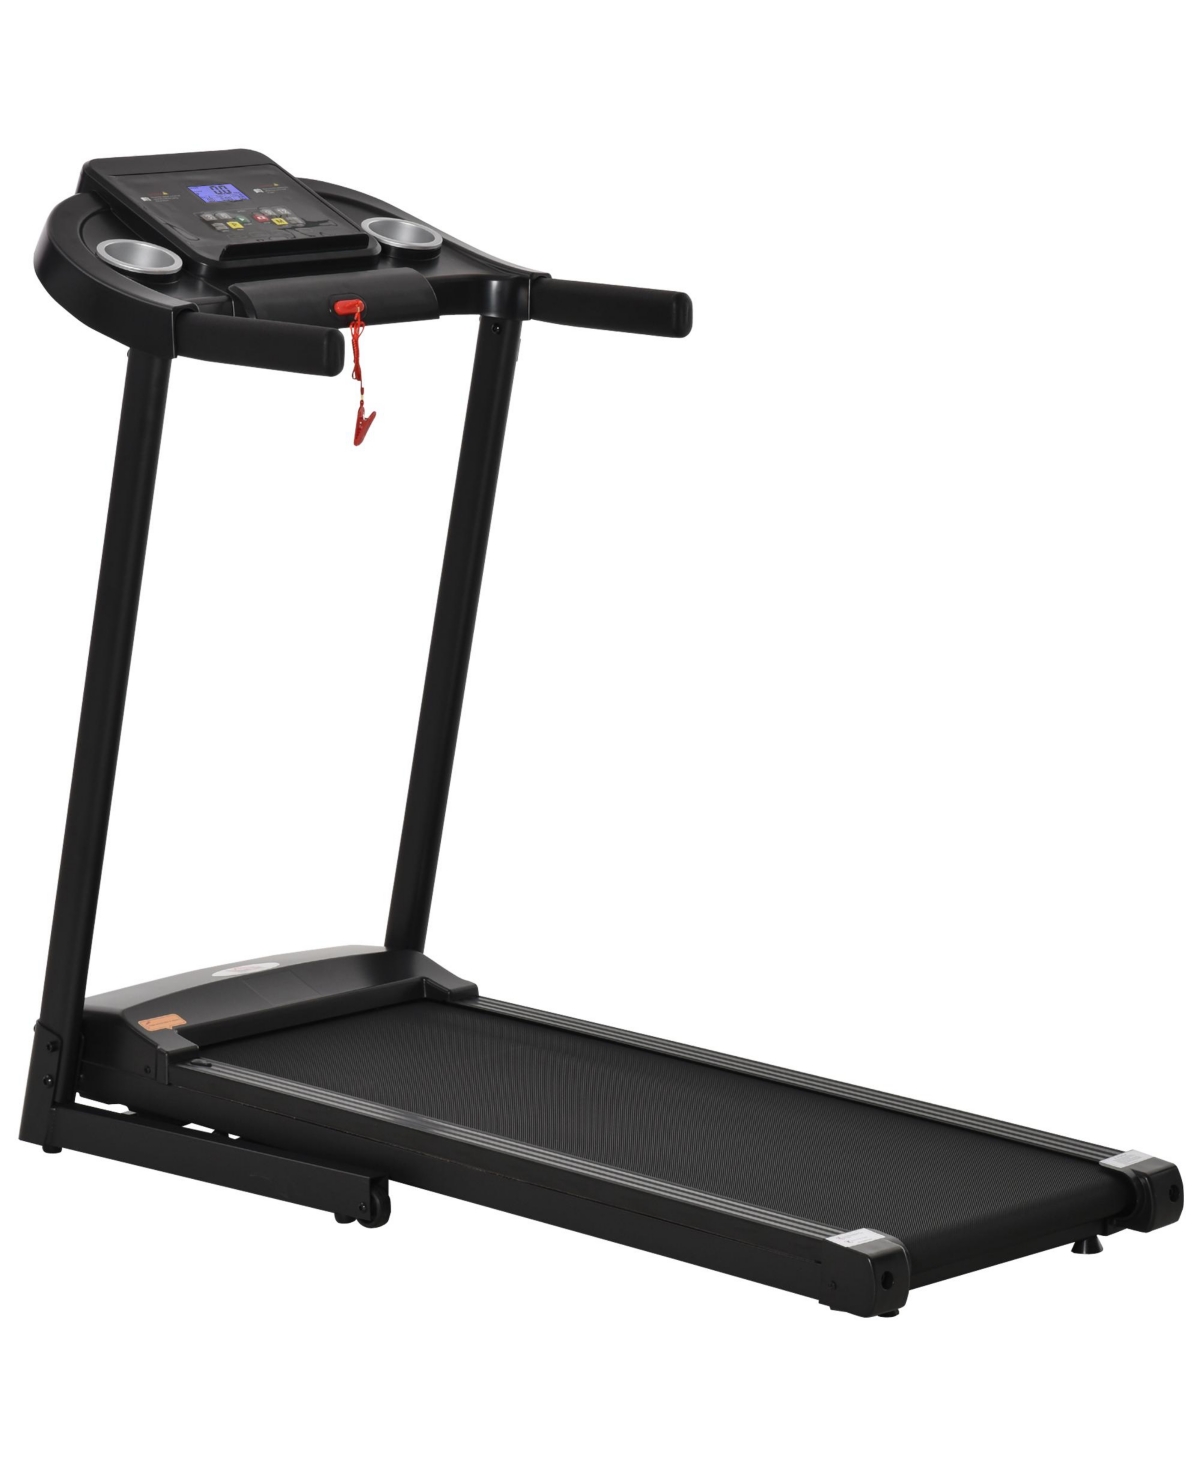 Folding Treadmill 1.5HP 7.45 Mph Max Speed Electric Motorized Running Jogging Walking Machine w/ 12 Preset Programs and Led Display for Home G